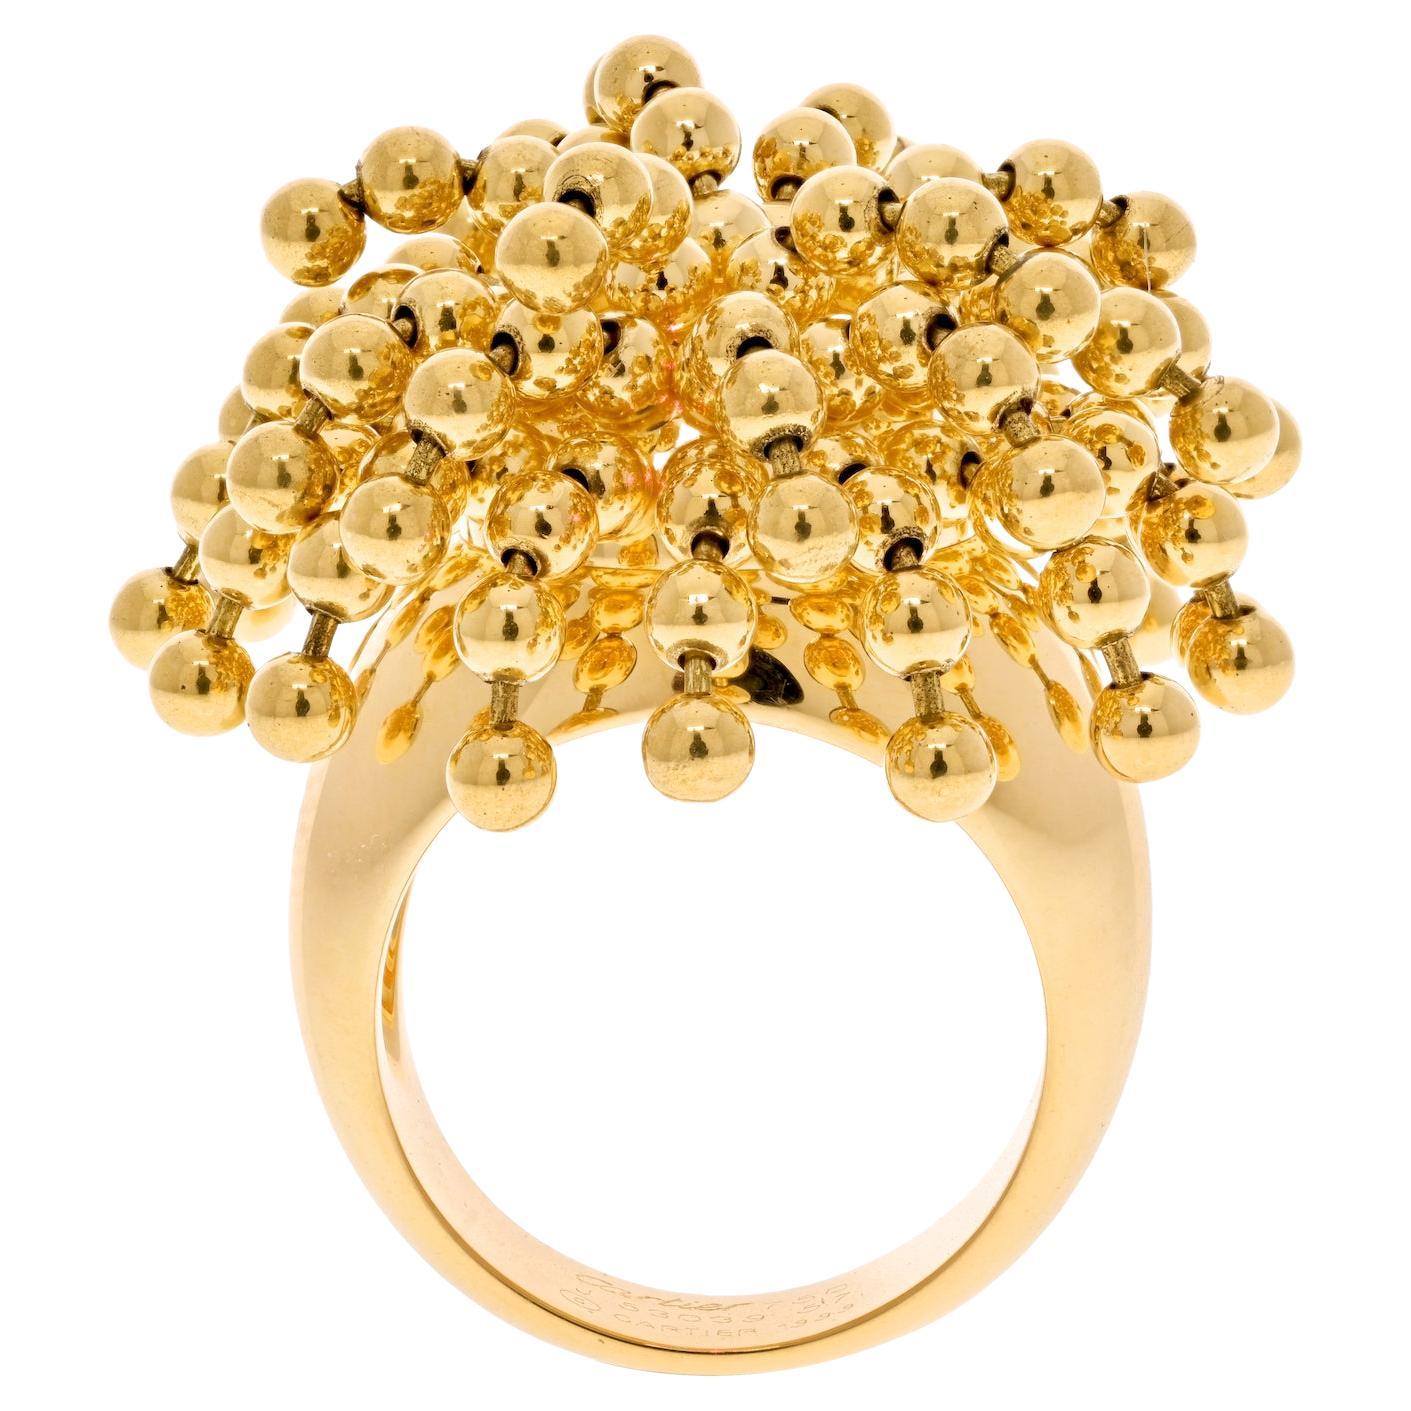 Cartier 18K Yellow Gold Paris Nouvelle Vague Articulated Bead Ring.

Absolutely adorable and oh so fun this staple of an accessory from Cartier is a must-have in every Cartier addict jewelry box.  Made of cascading cluster of movable beads this ring